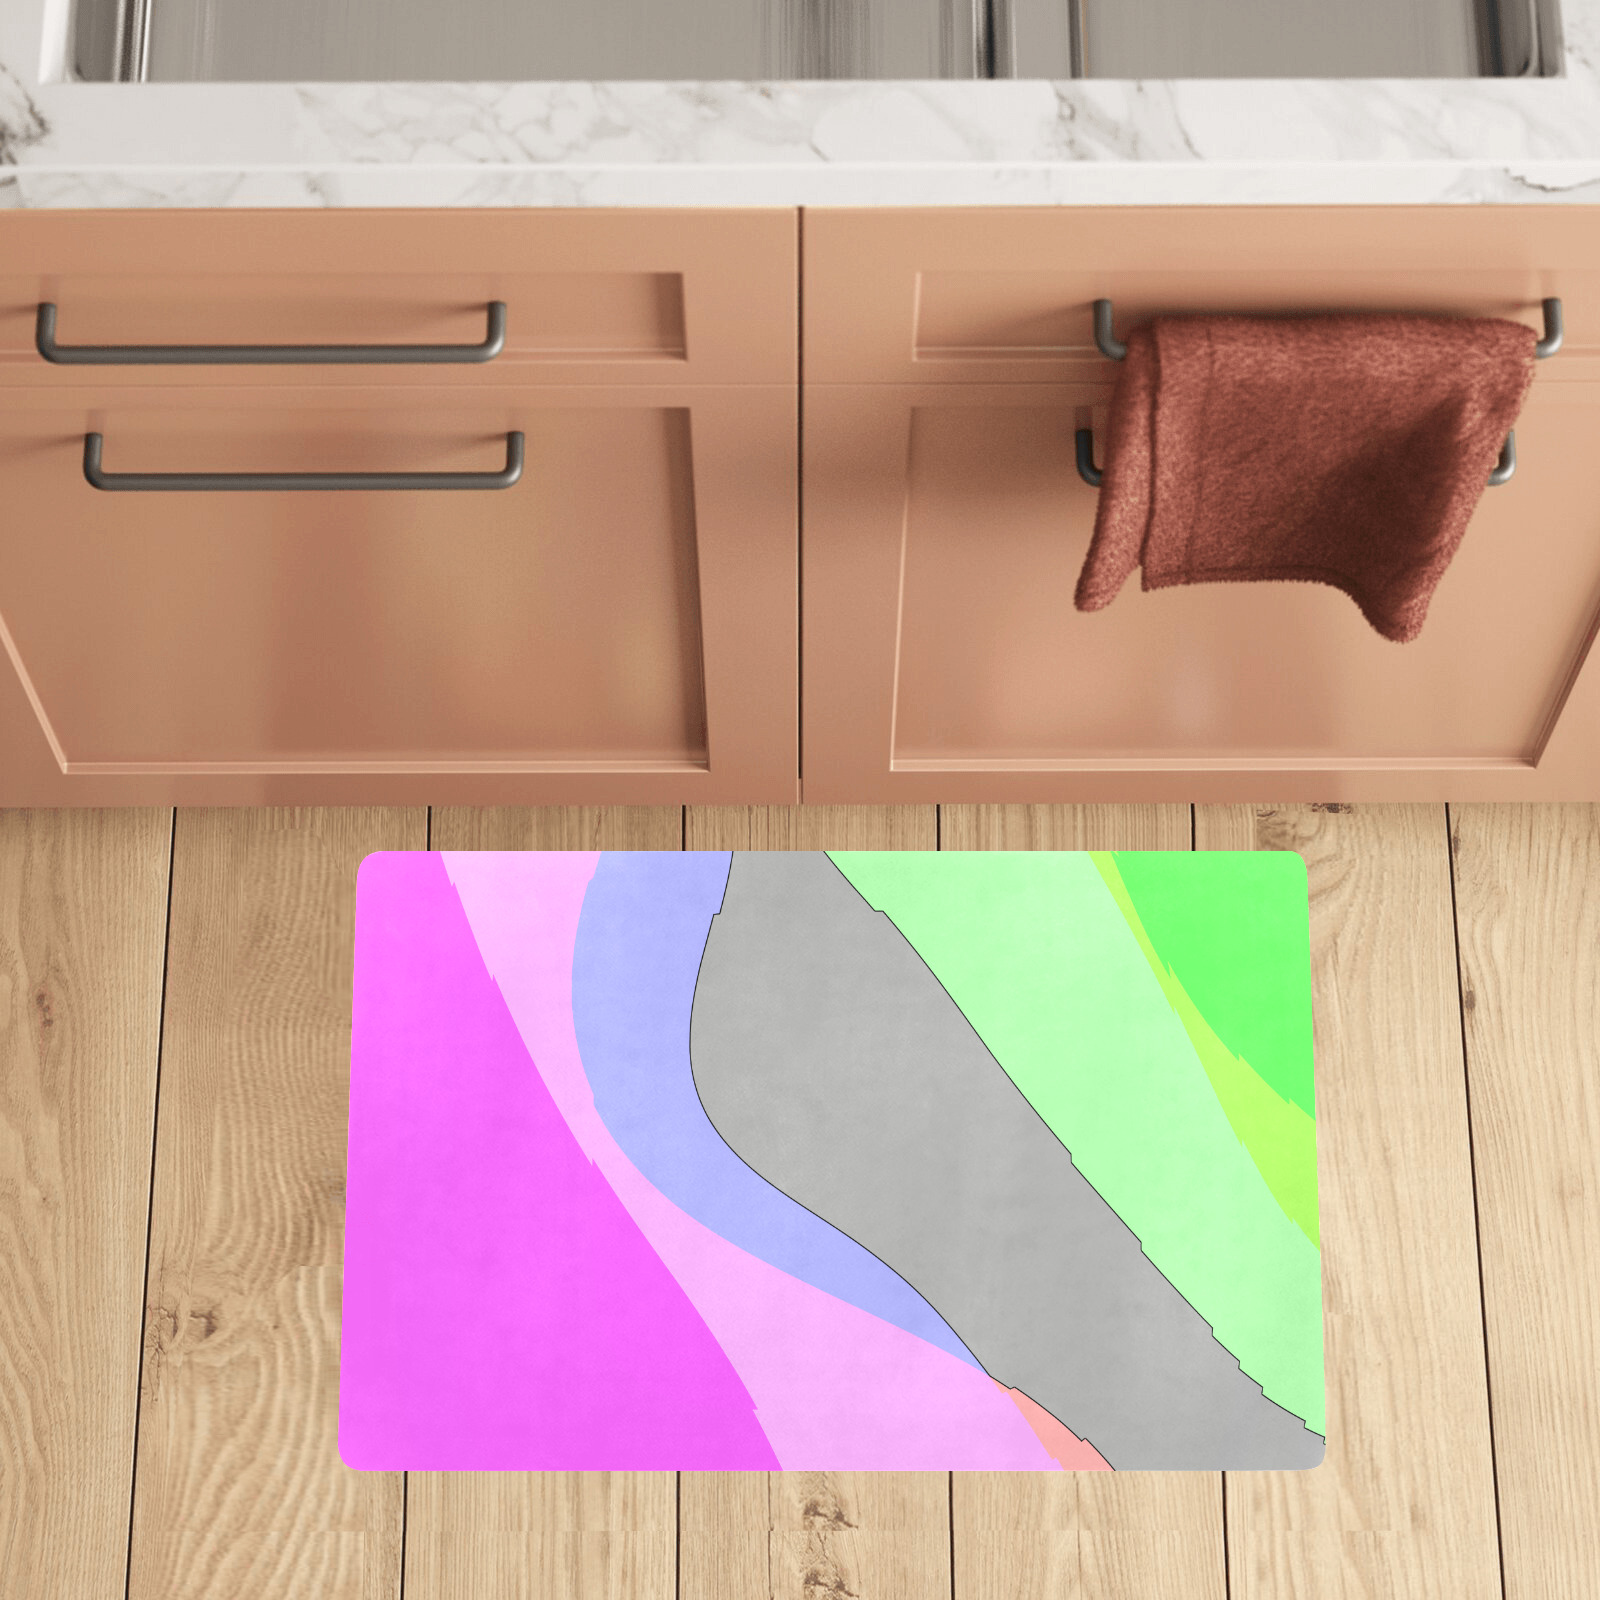 Abstract 703 - Retro Groovy Pink And Green Kitchen Mat 28"x17"